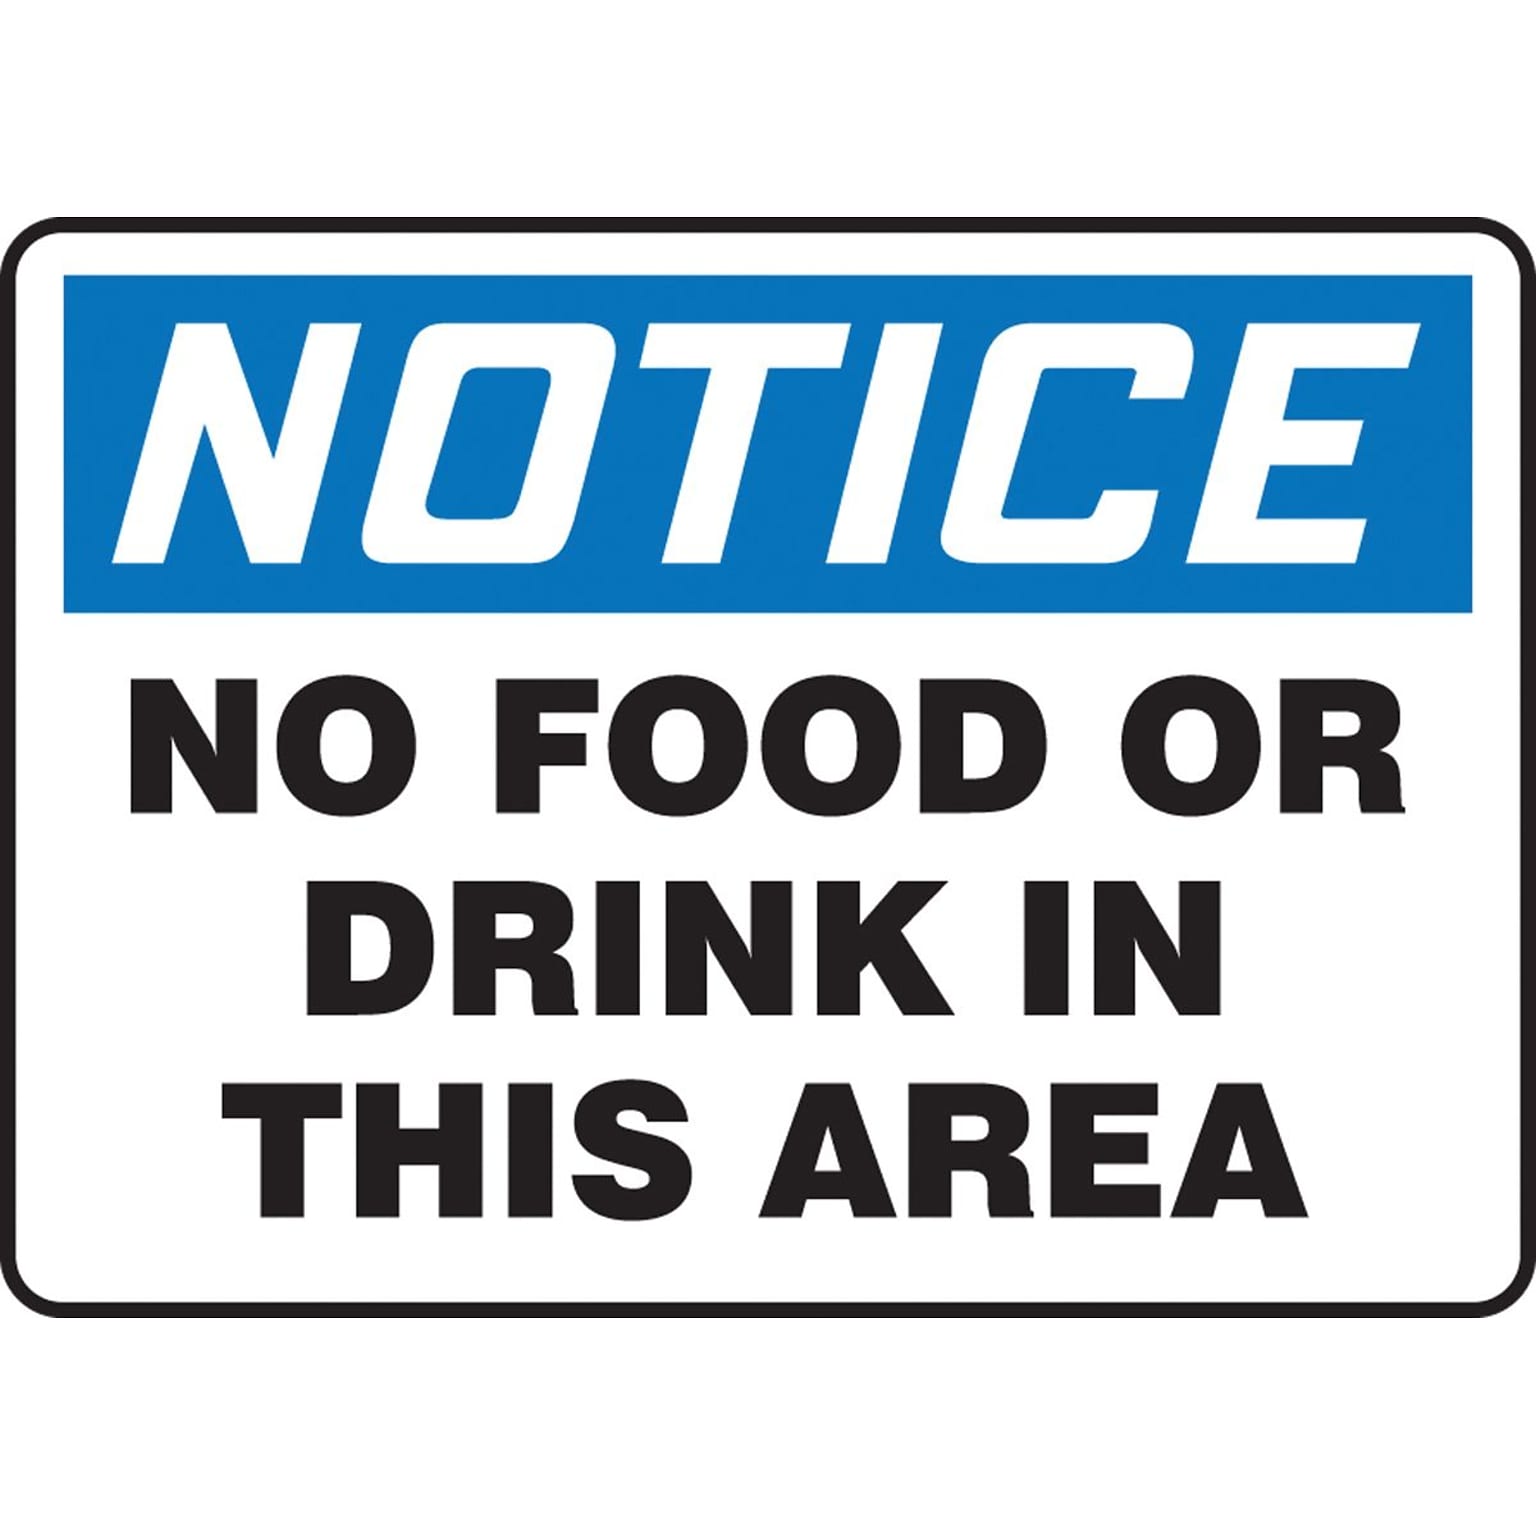 Accuform 10 x 14 Adhesive Vinyl Housekeeping Sign NOTICE NO FOOD.., Blue/Black On White (MHSK838VS)